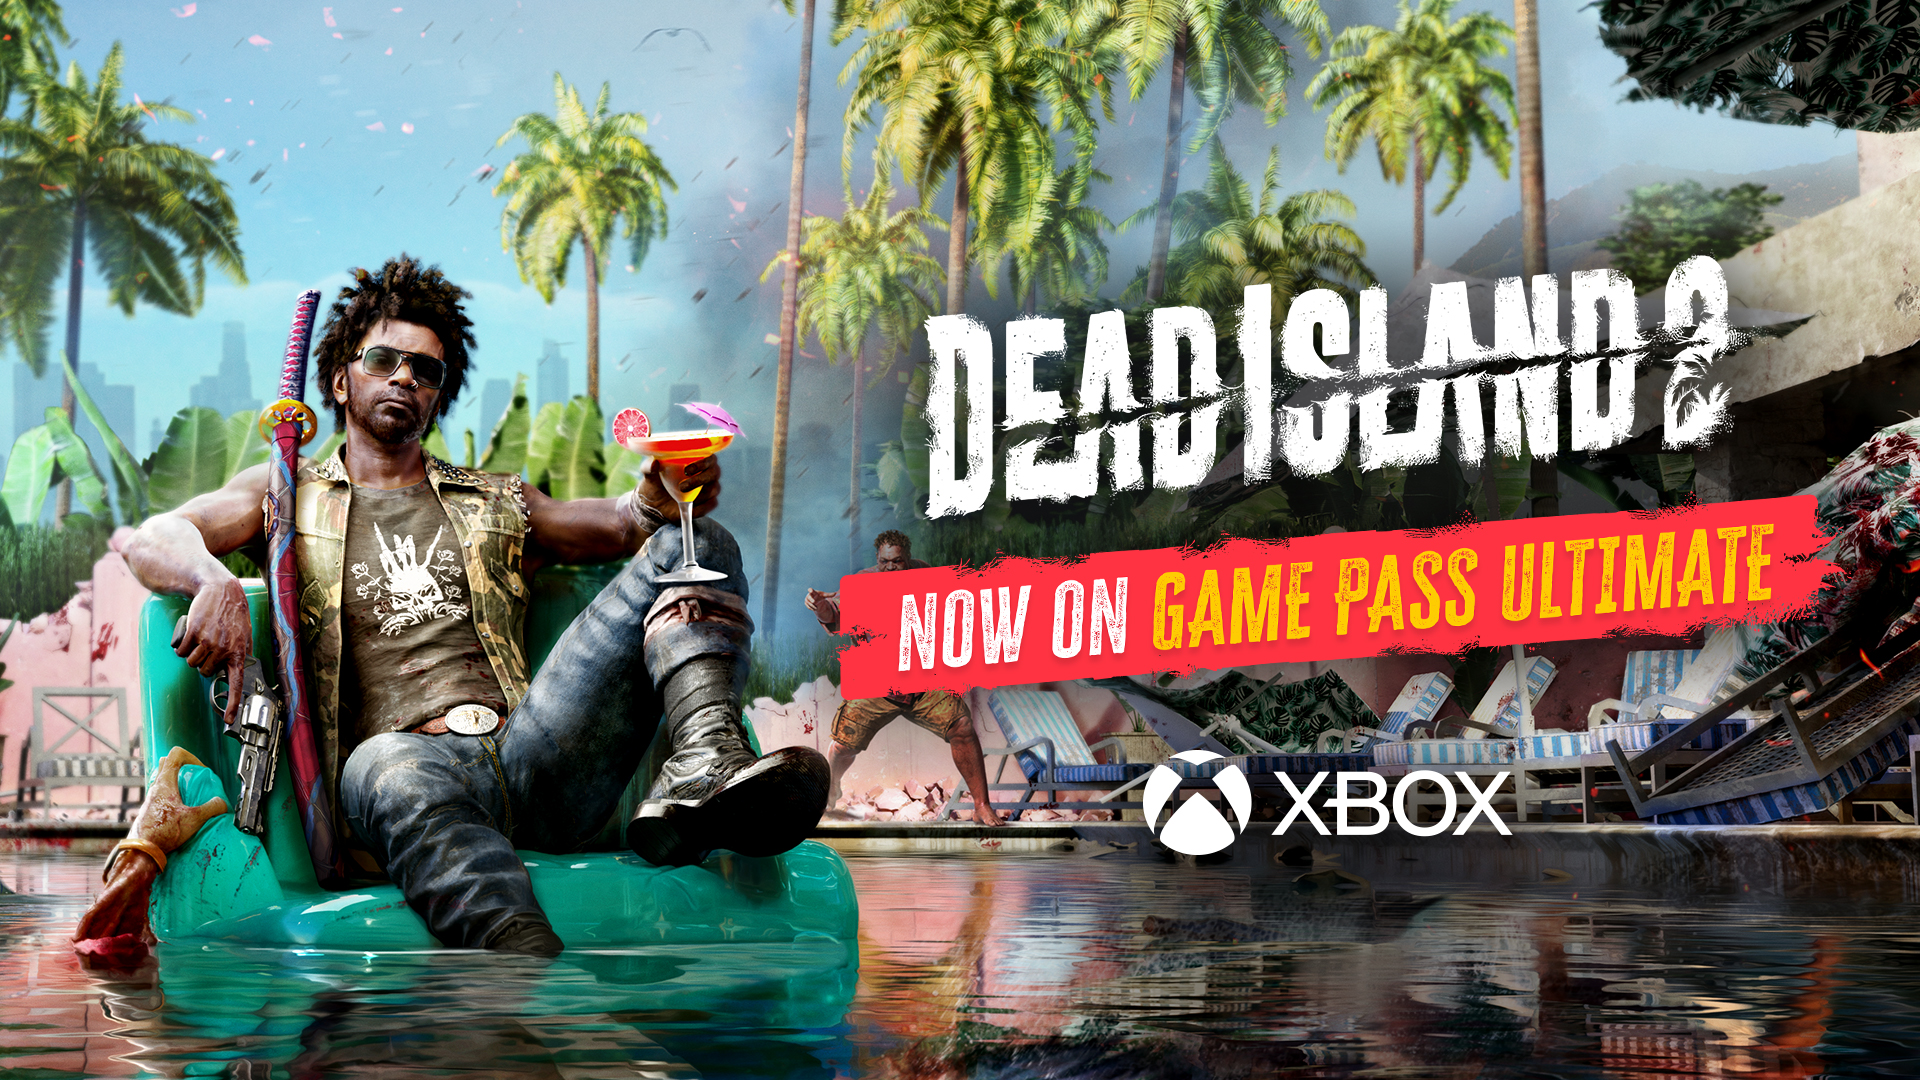 Dead Island 2 Ps5 - Top Action Game At Cheap Price